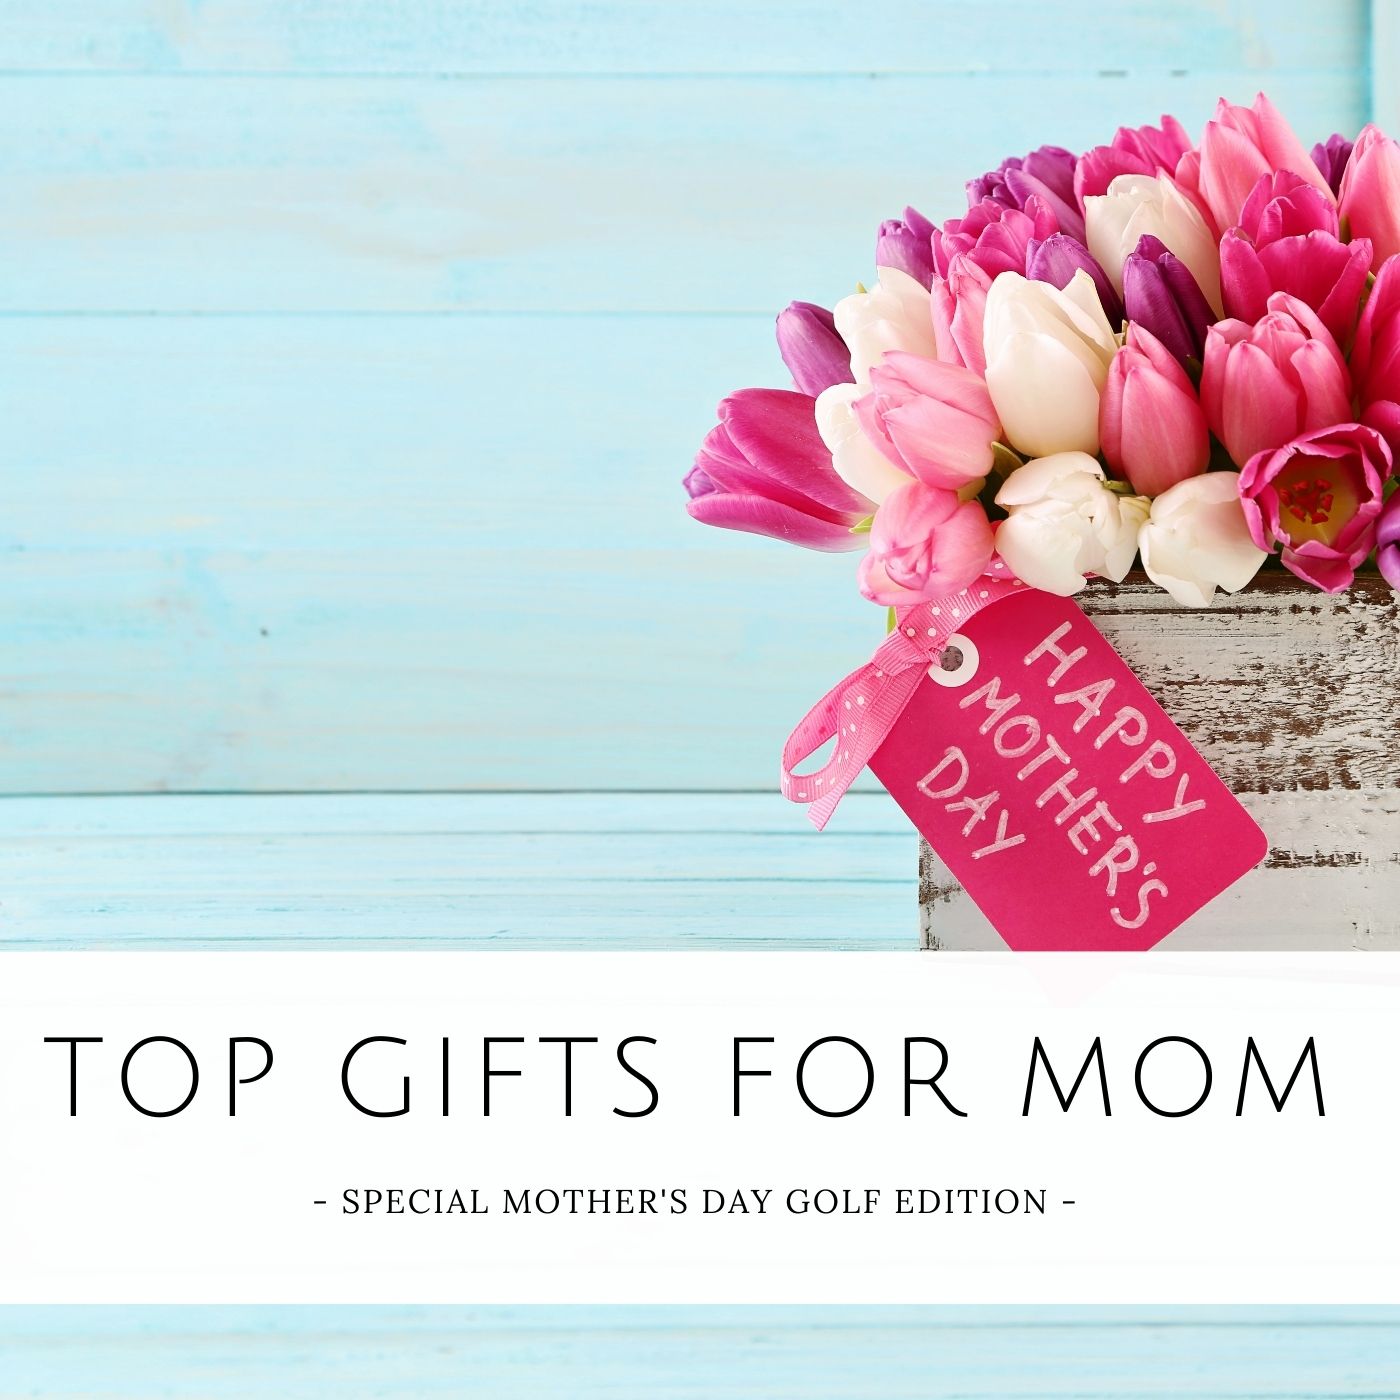 Top Golf Gifts for Mom for Mother's Day